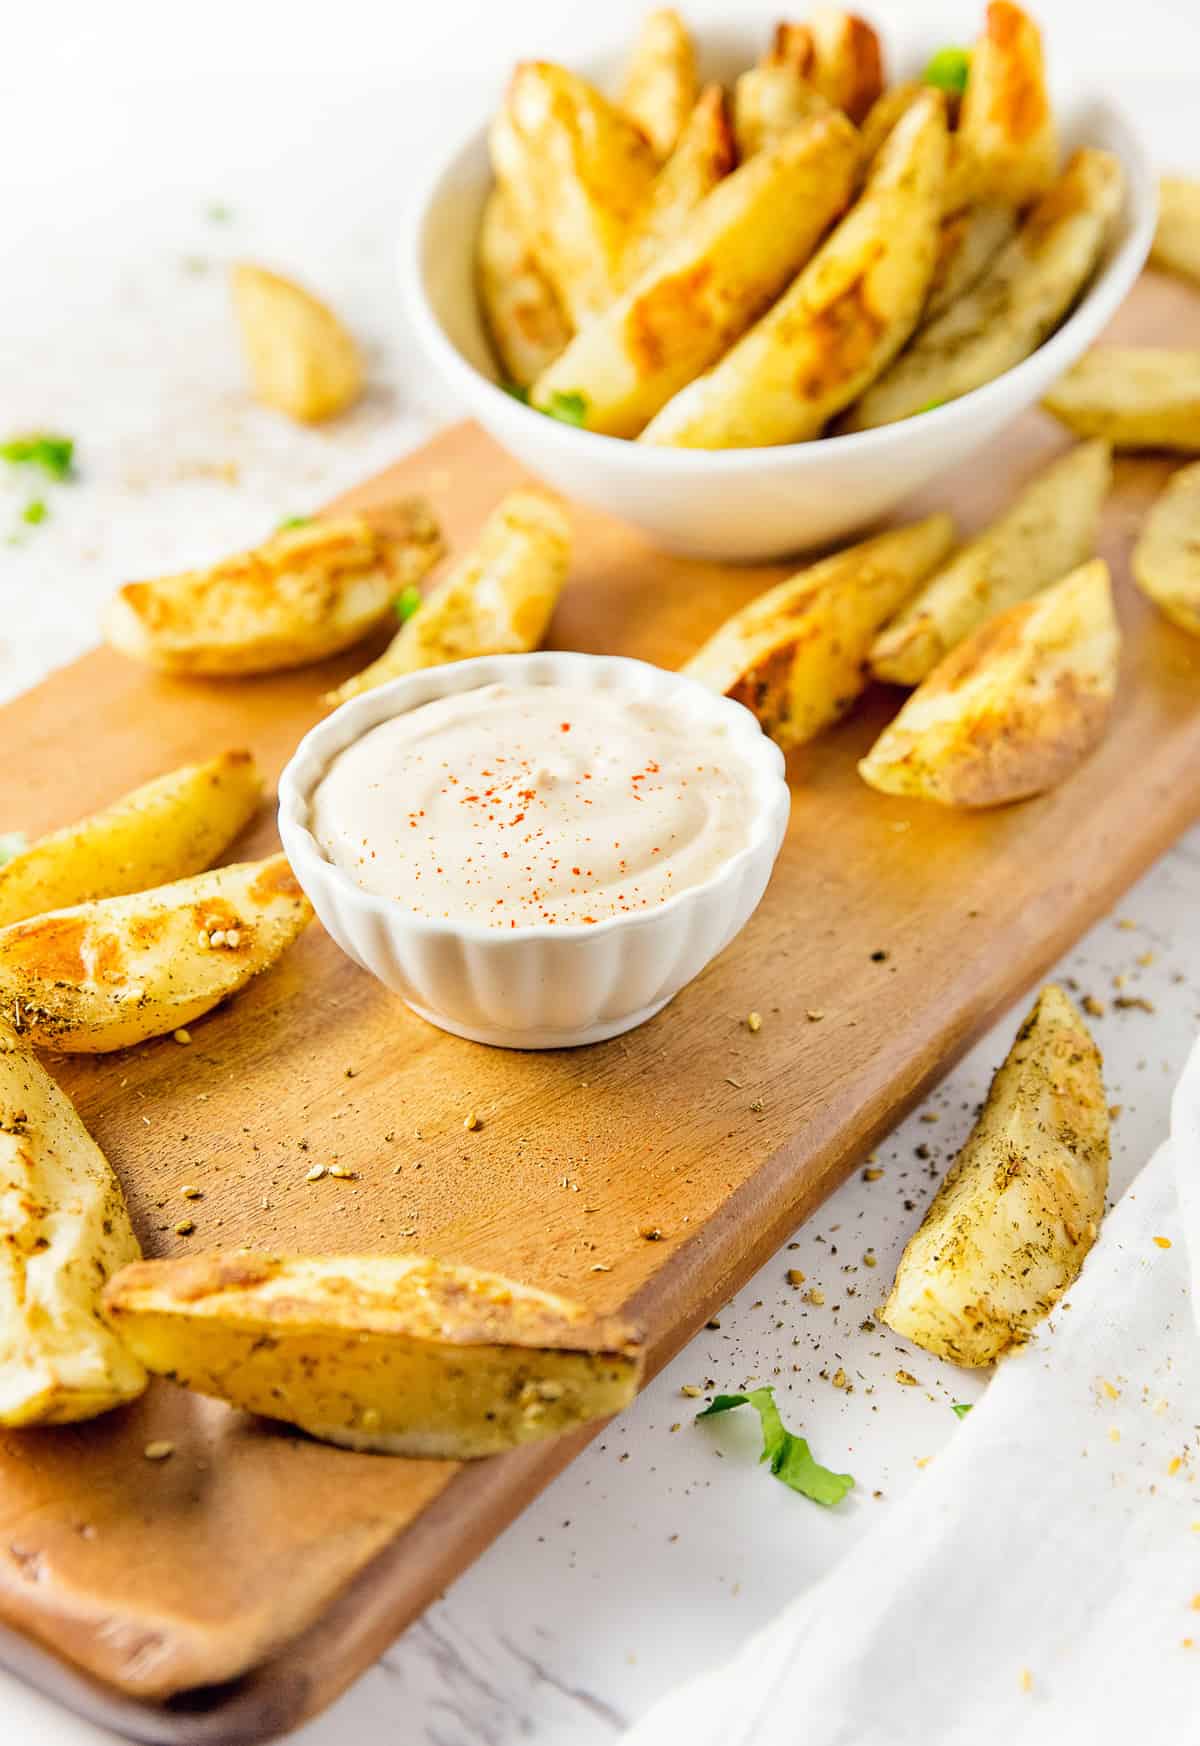 Oven Baked Zaatar Fries, plant based, vegan, vegetarian, whole food plant based, gluten free, recipe, wfpb, healthy, healthy vegan, oil free, no refined sugar, no oil, refined sugar free, dairy free, dinner party, entertaining, side, fries